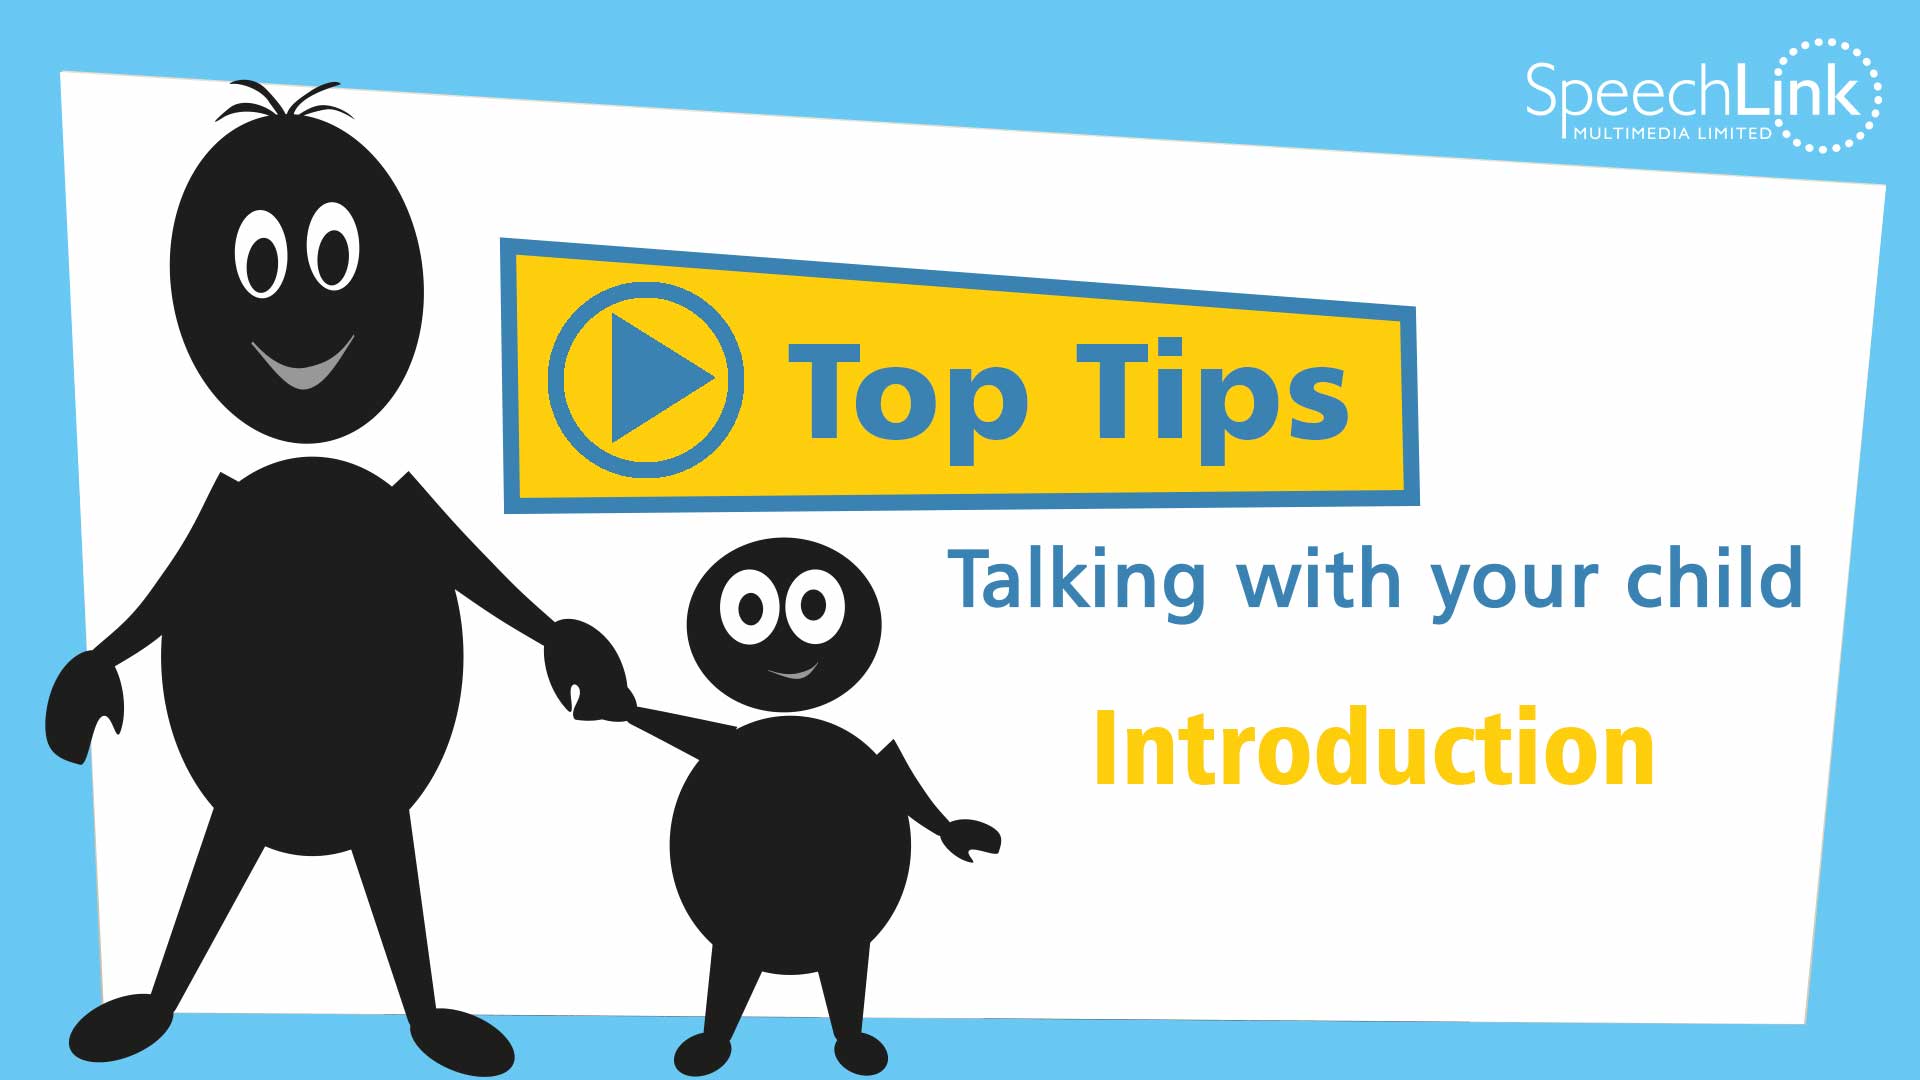 Top Tips for talking with your child video